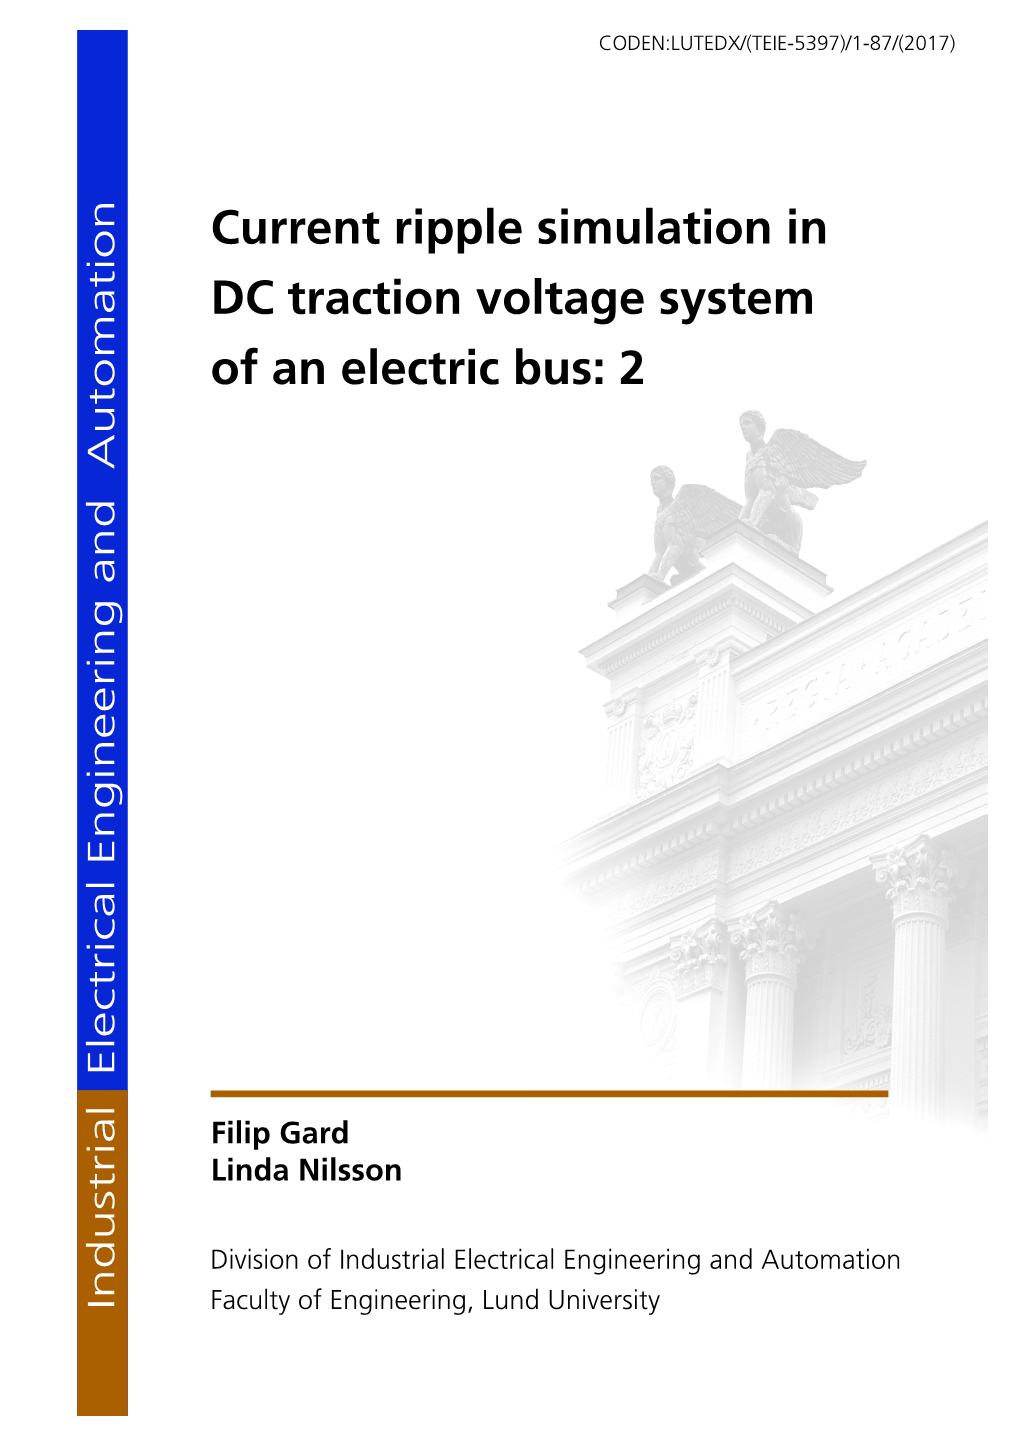 Current Ripple Simulation in DC Traction Voltage System of an Electric Bus: 2